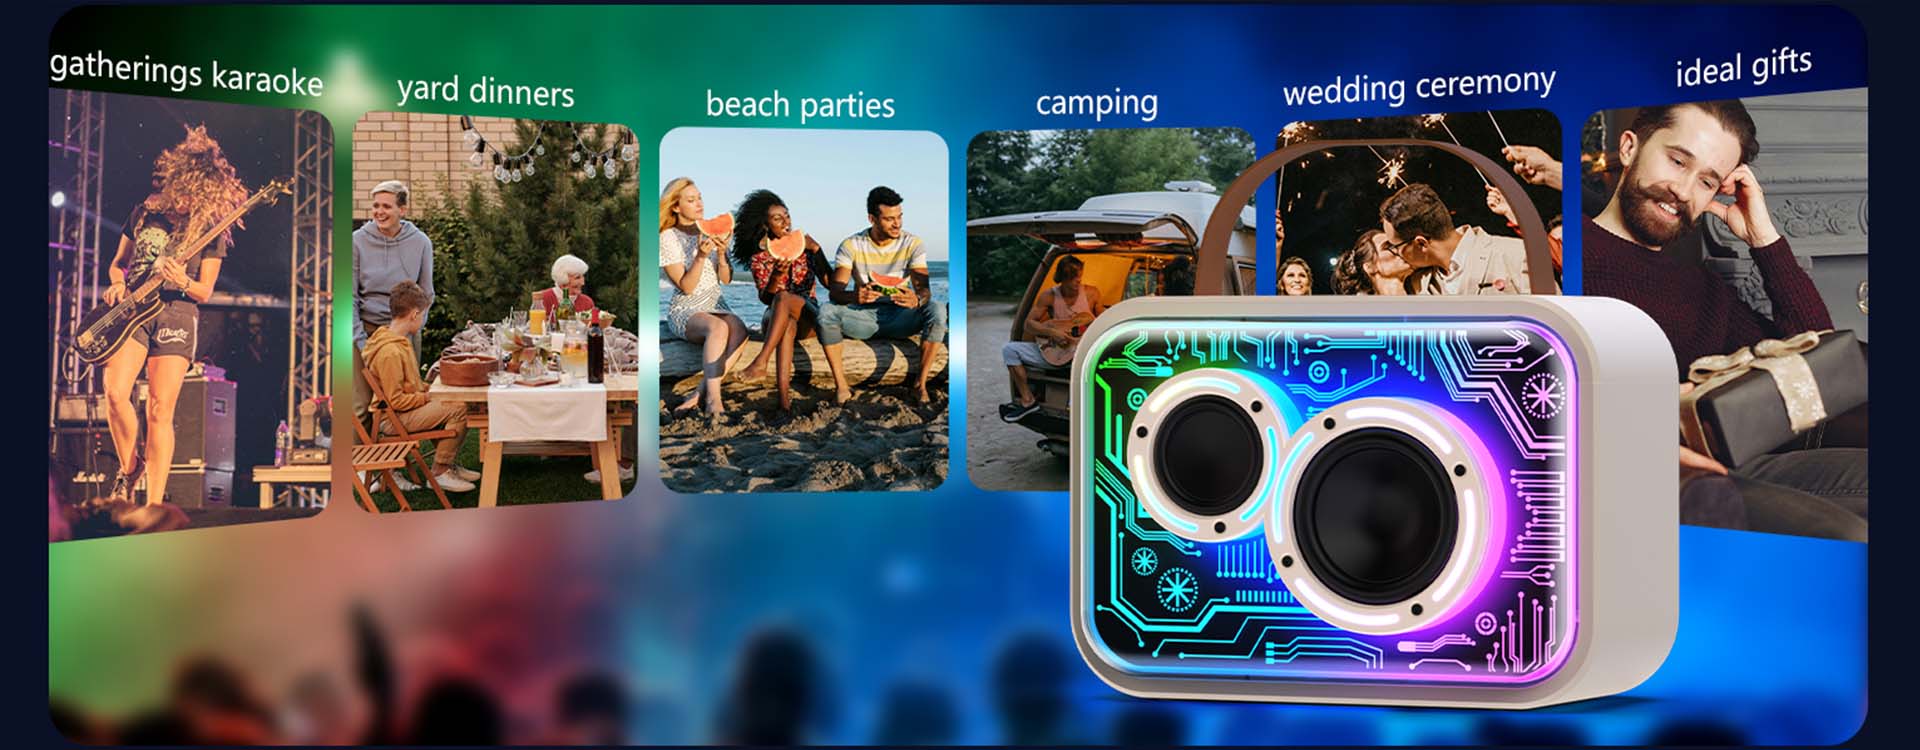 JYX D30 Karaoke Machine with Bluetooth and Wireless Mic for gatherings, yard dinners, beach parties, camping, wedding ceremonies, and ideal gifts.